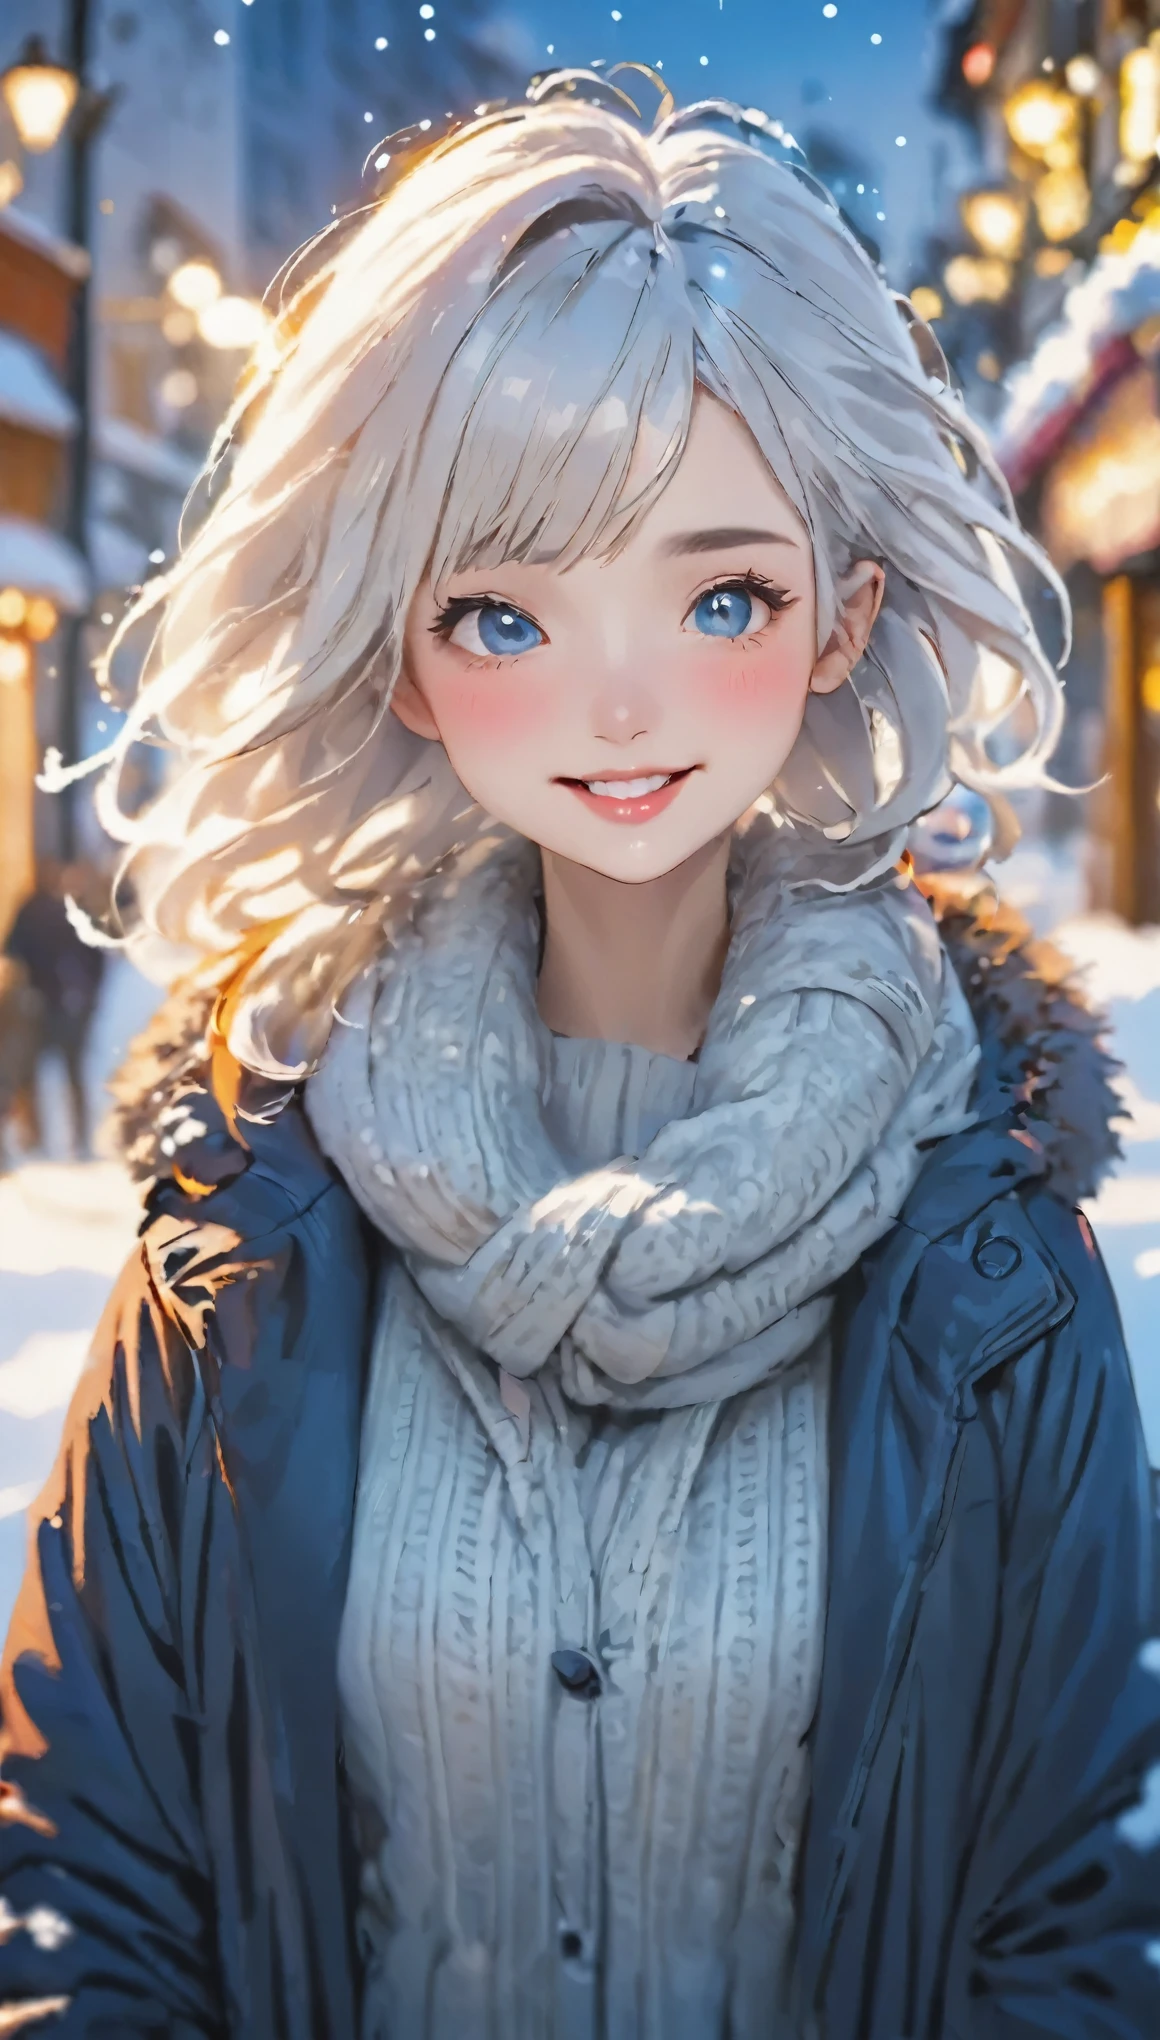 Highly detailed face, ((Drop your eyes)), pretty girl, Vibrant colors, Soft natural light, Bokeh effect. Winter clothing, Perfect Makeup, Professional photography, Street Snapshots, Vibrant colors, (smile, Laughter), 